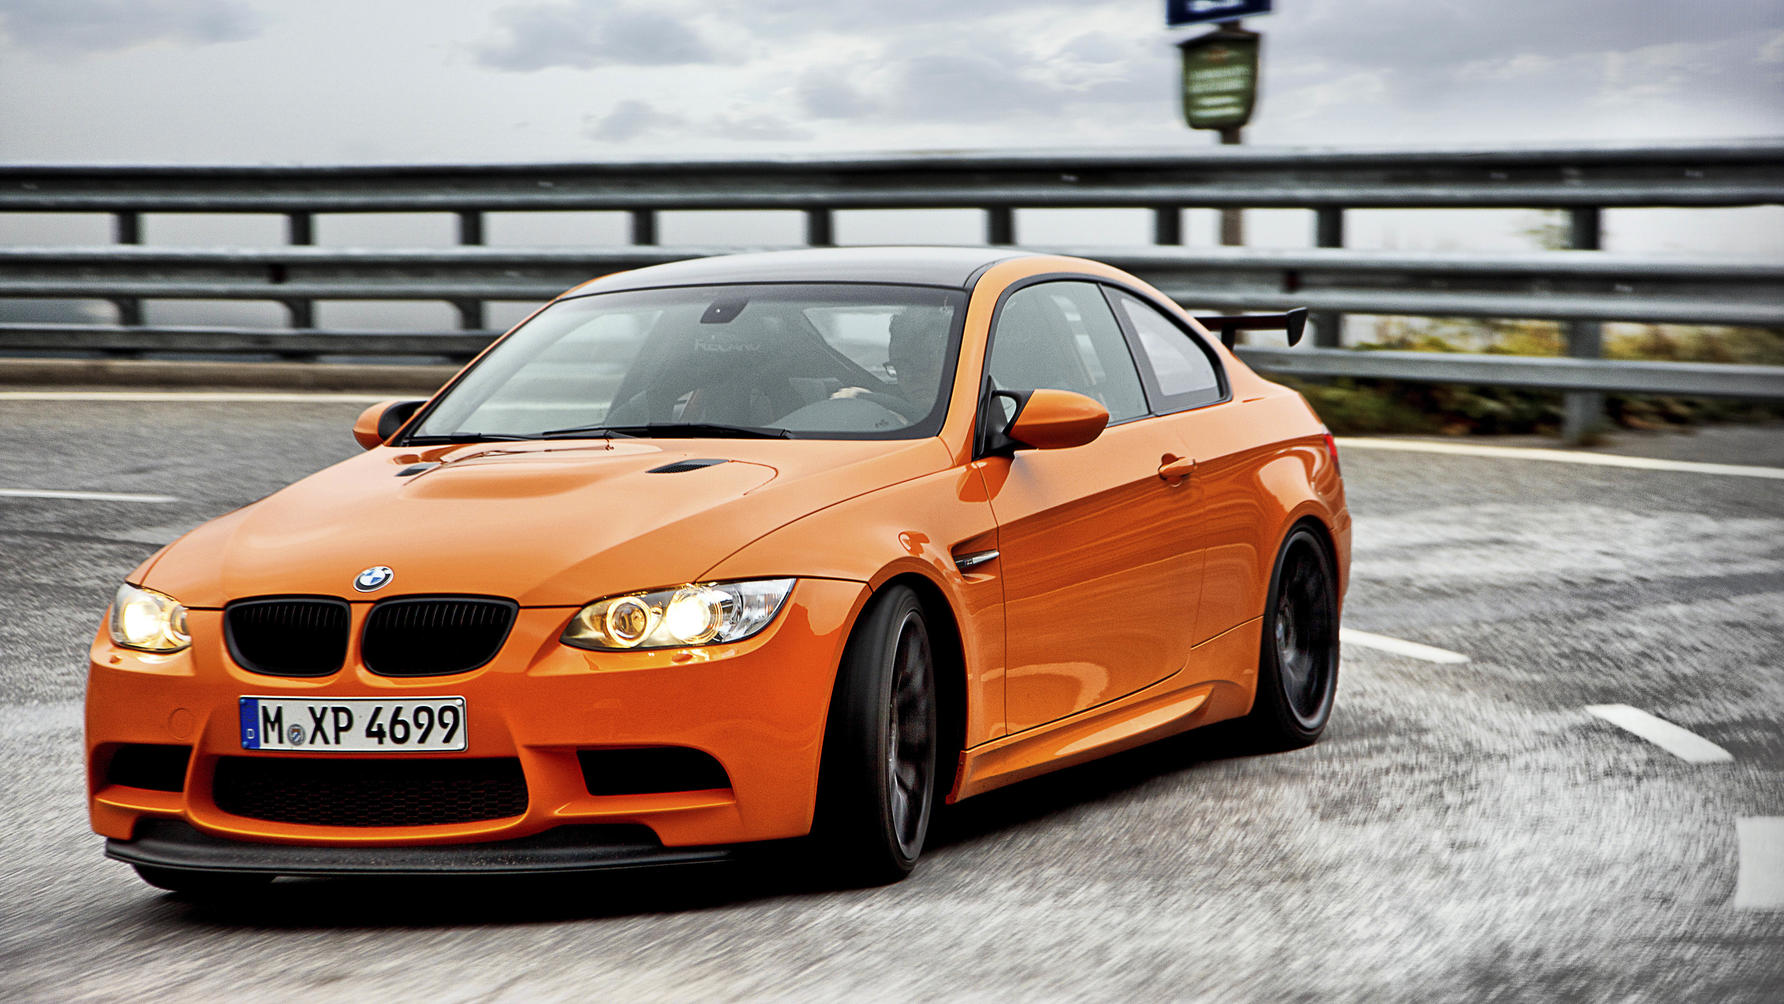 From the archives: BMW M3 GTS vs the Grossglockner Pass